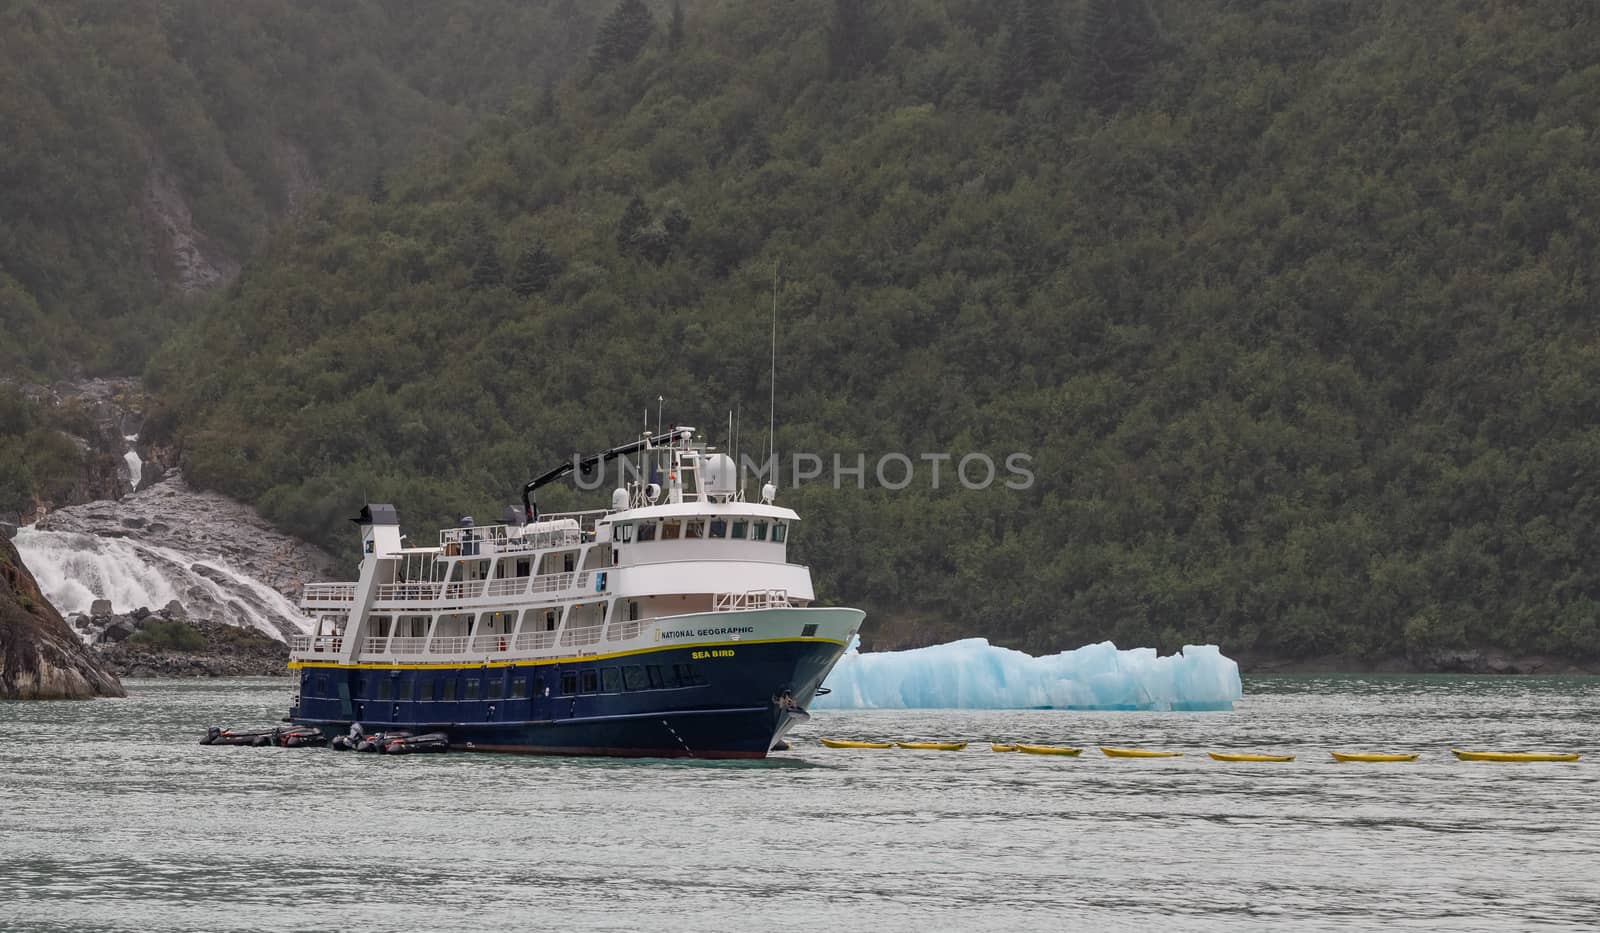 Tracy Arm Fjord, Alaska, US - August 23, 2018: National Geographic's Sea Bird vessel drifting with a mountain, a waterfall, and an iceberg behind it in Tracy Arm Fjord in Alaska, USA